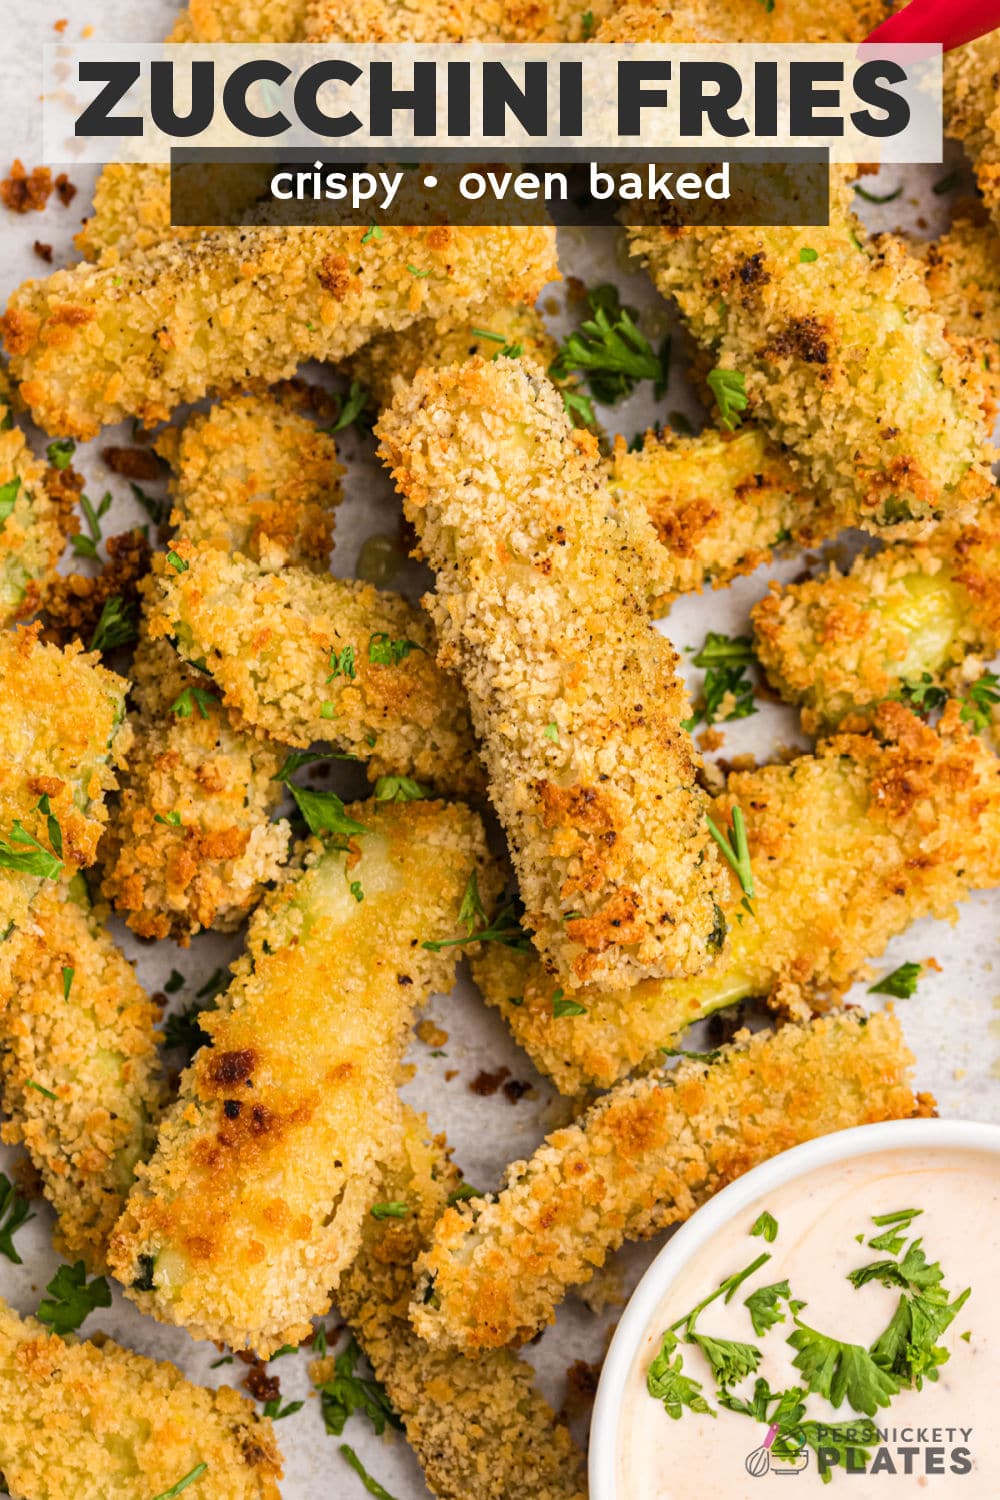 Panko Crusted Zucchini Fries are crispy and seasoned on the outside, tender on the inside, and a great alternative to french fries. Serve with your favorite dipping sauce and even your kids will be asking for seconds! | www.persnicketyplates.com